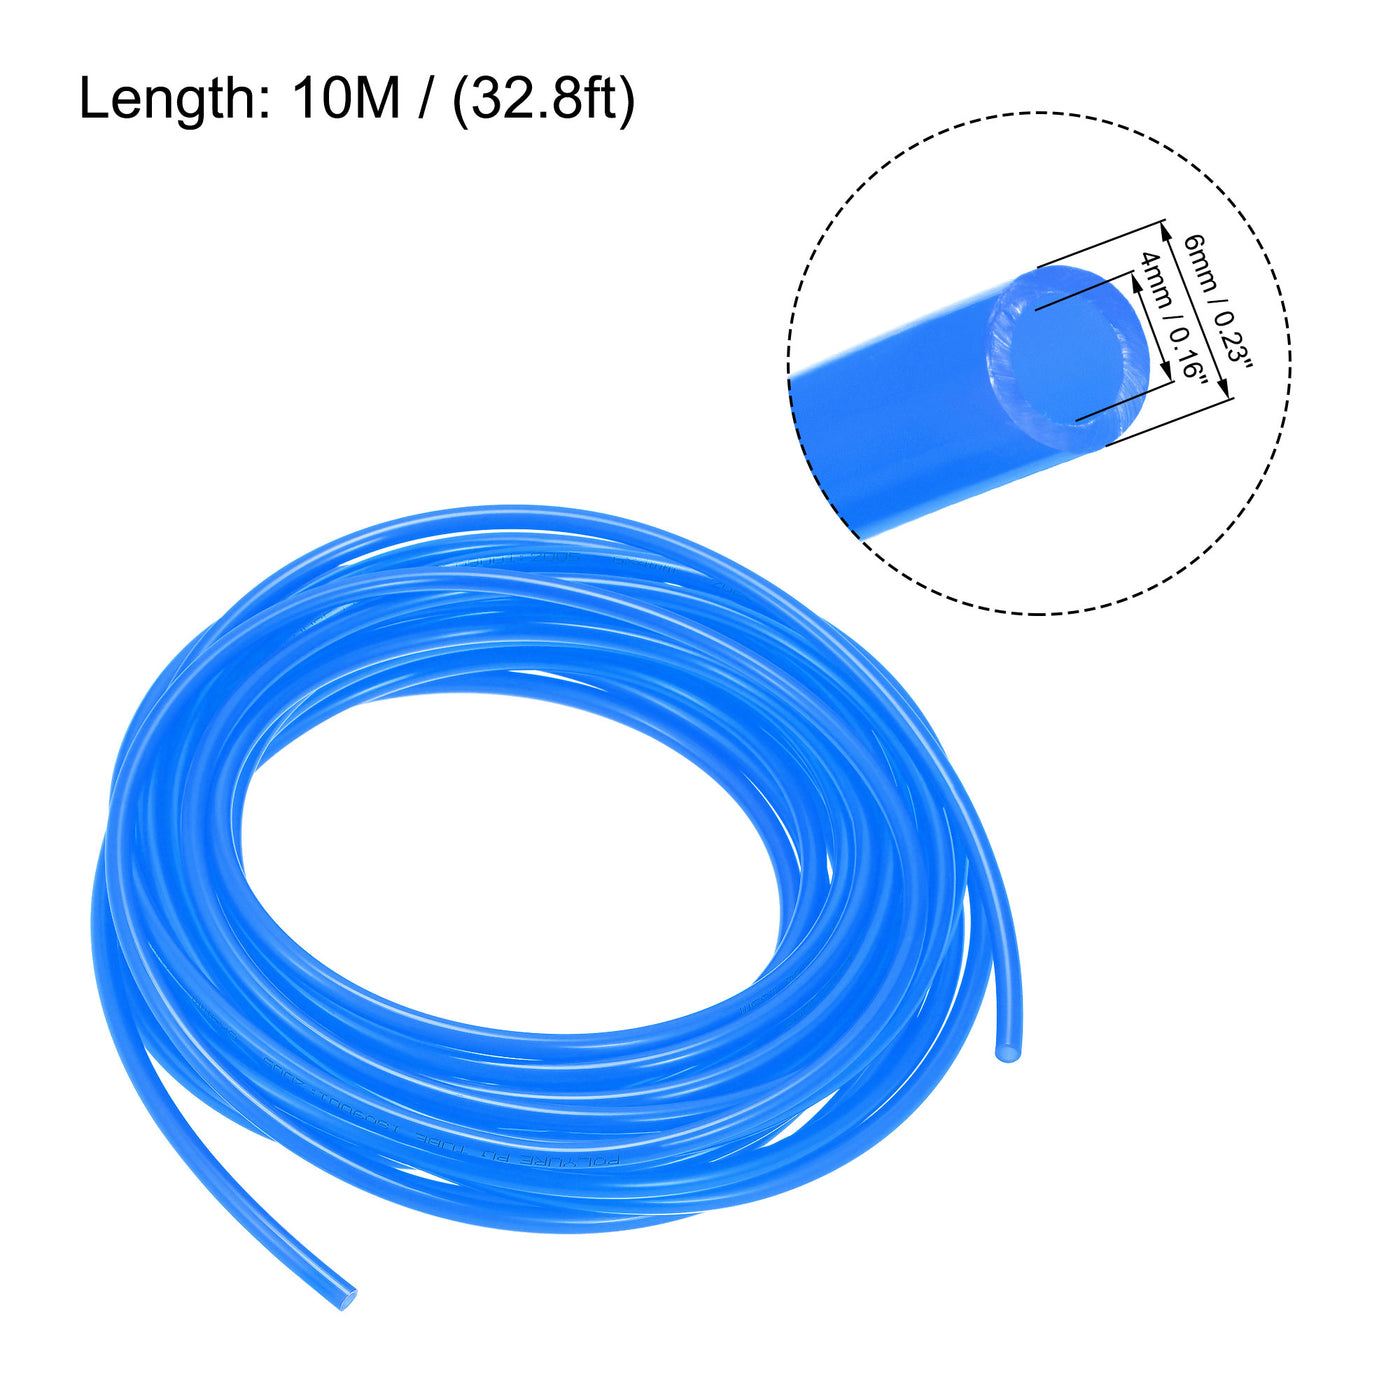 uxcell Uxcell Pneumatic Air Hose Tubing Air Compressor Tube 4mm/0.16''ID x 6mm/0.23''OD x 10m/32.8Ft Polyurethane Pipe Blue with 2 Type Connect Fittings